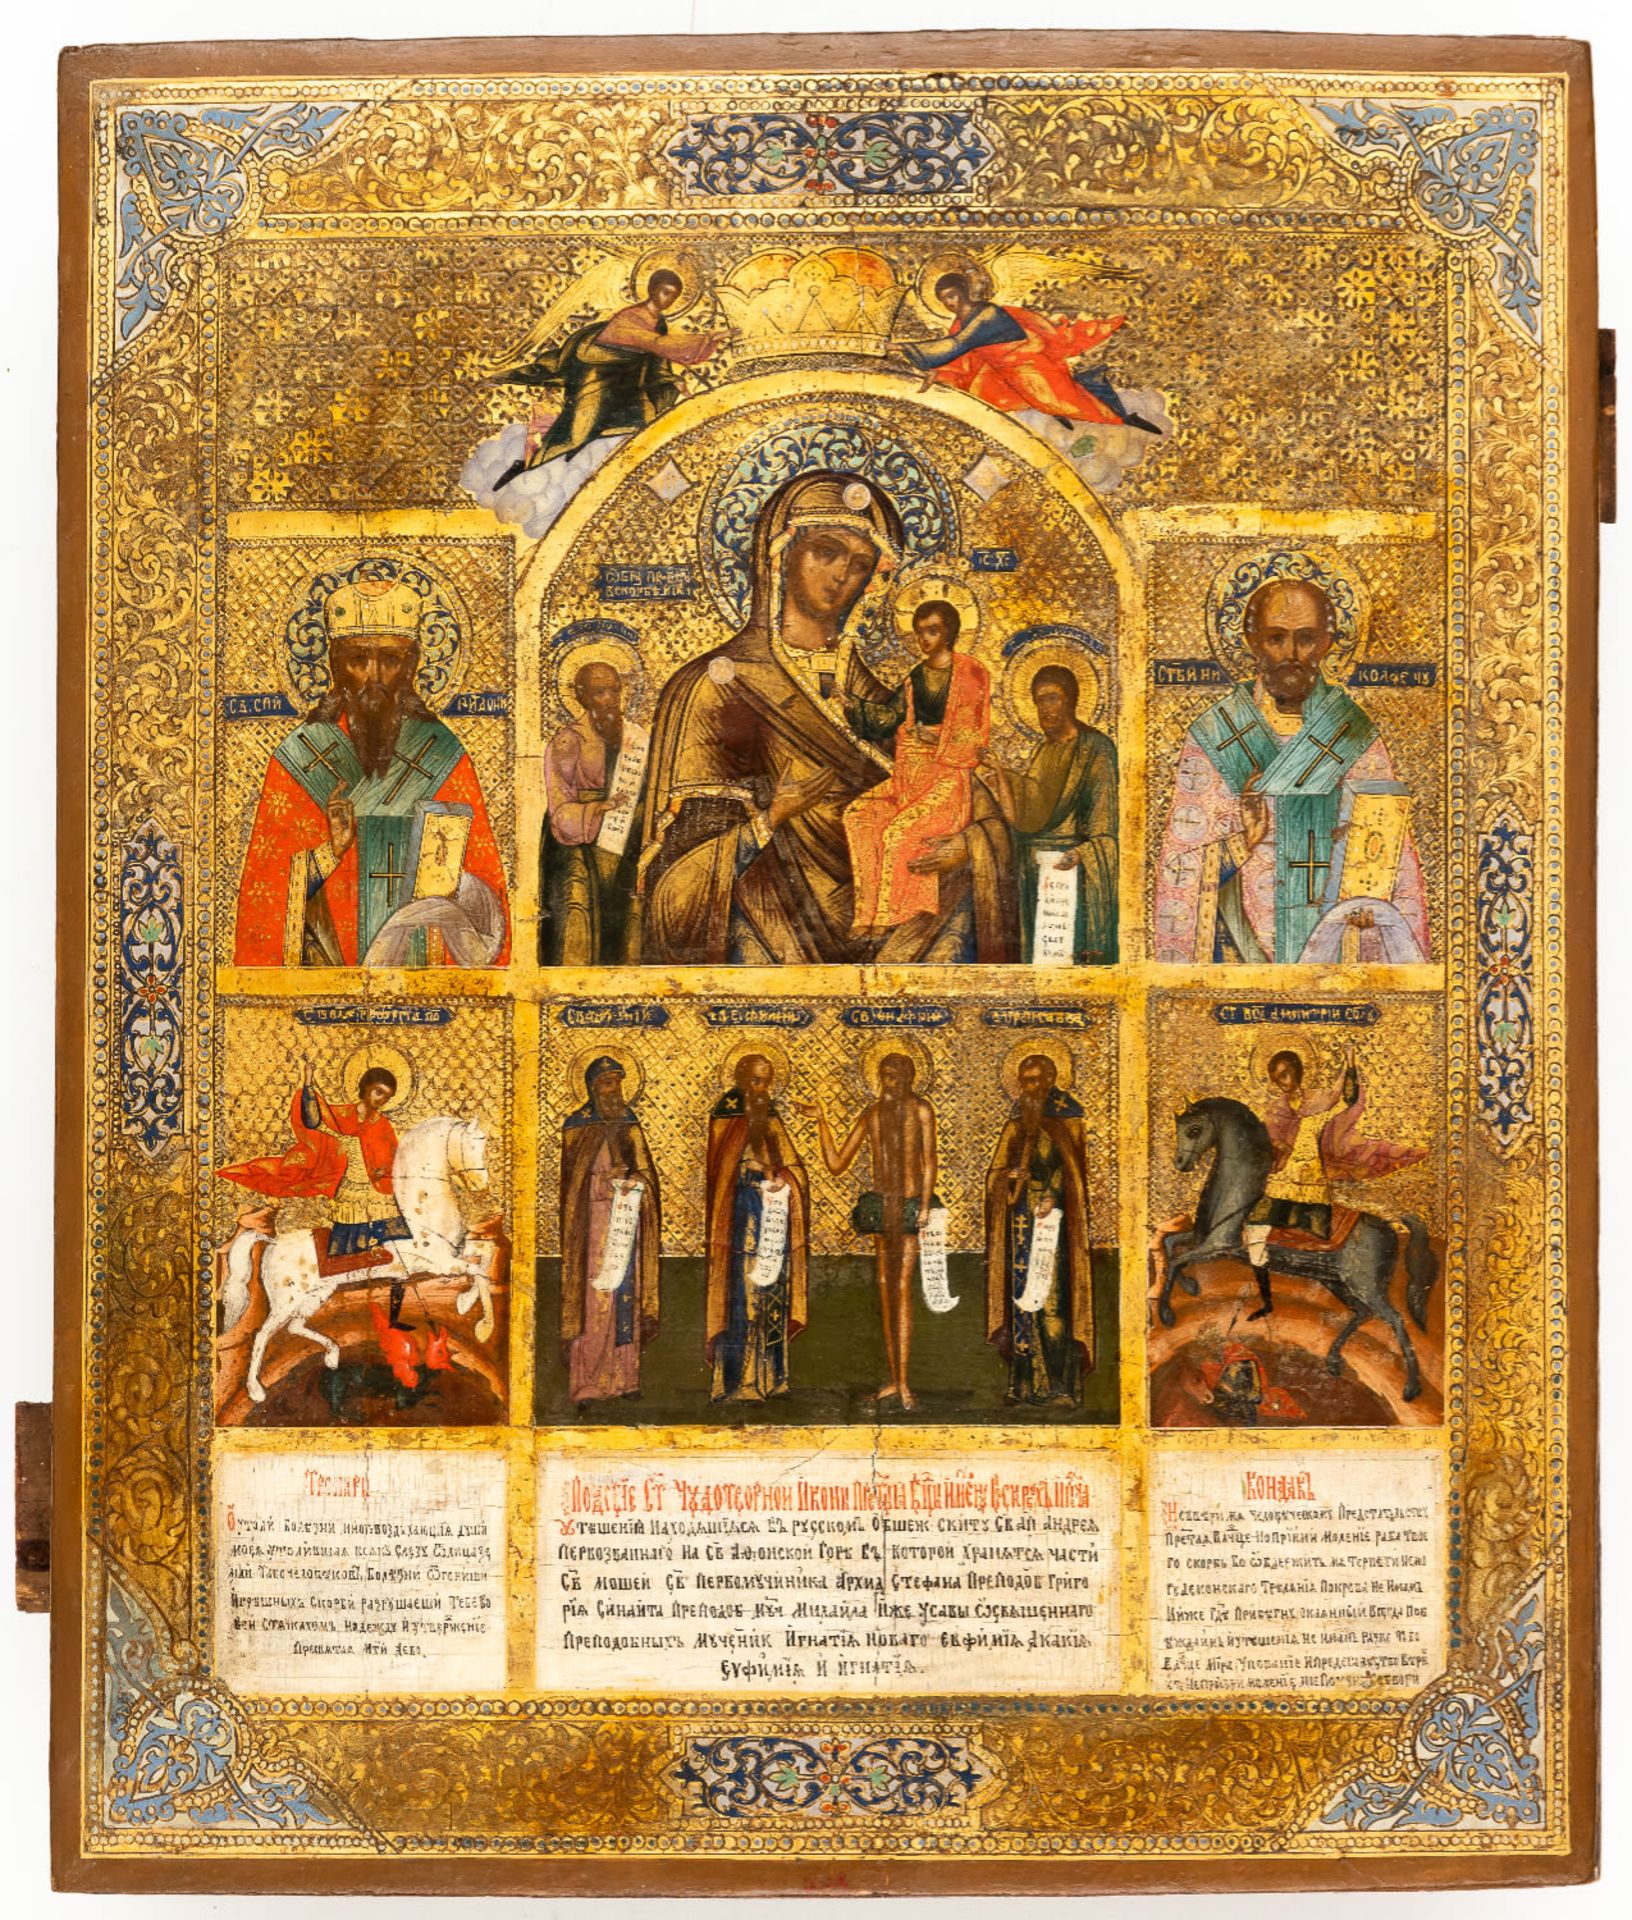 LARGE RUSSIAN ICON SHOWING THE MOTIF 'CONOSOLATION WORRIES AND NEEDS'